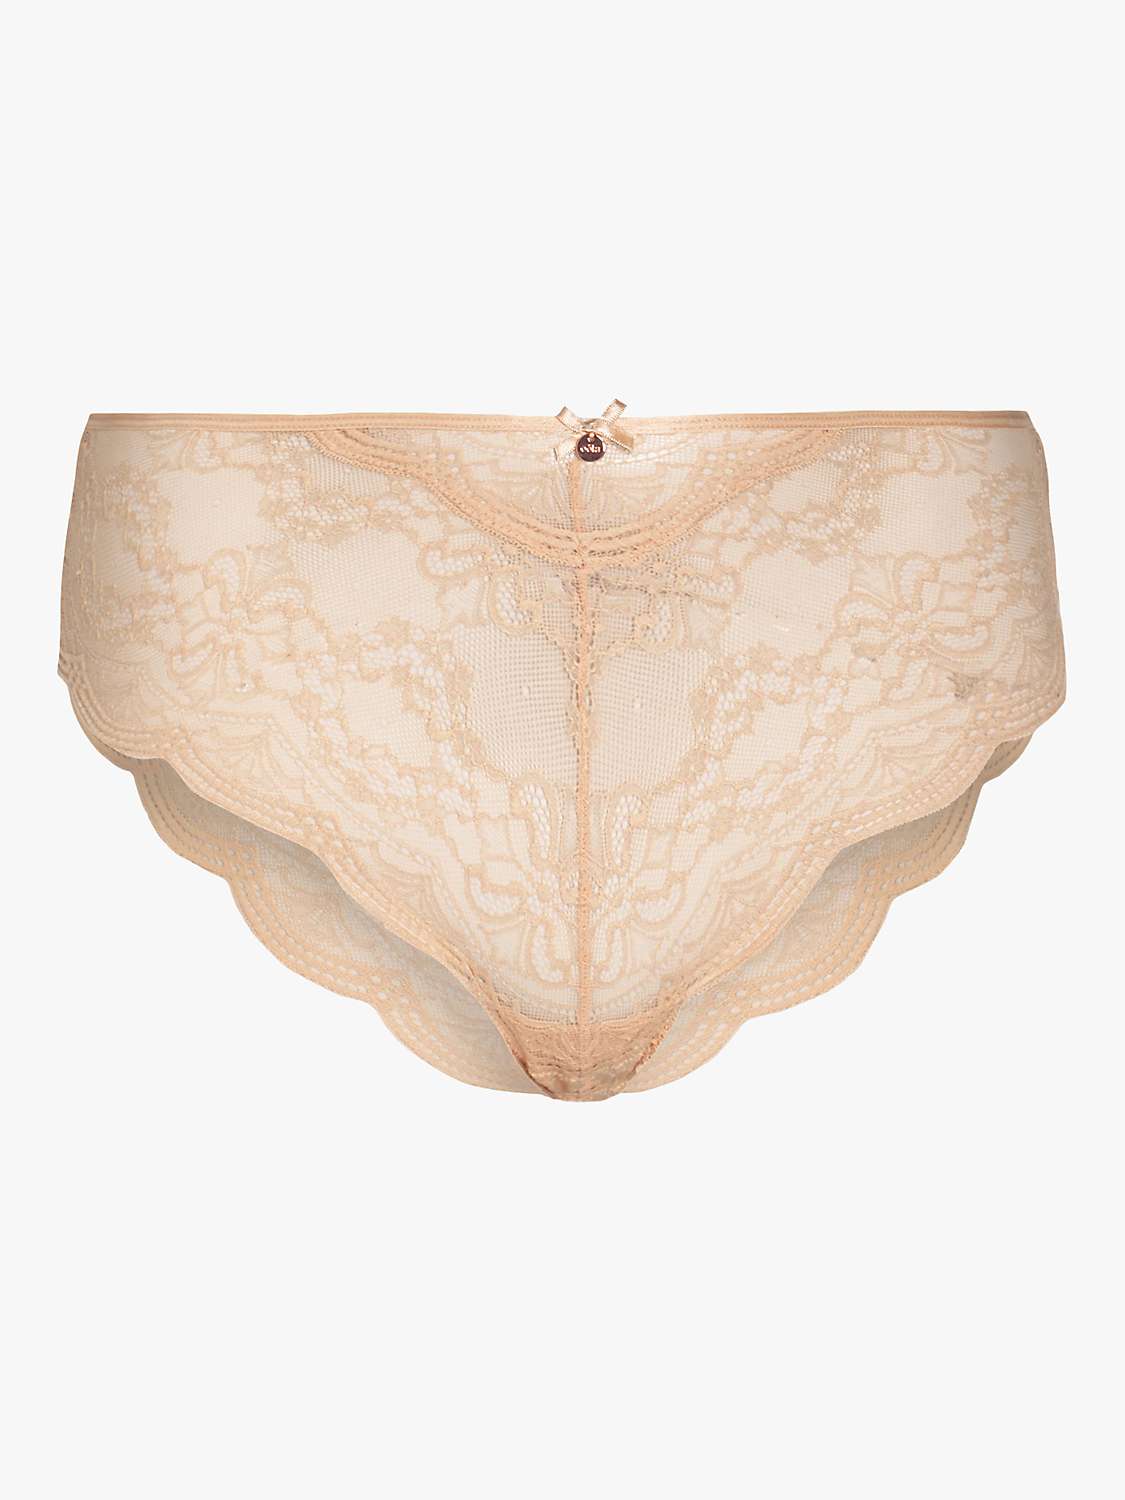 Buy Oola Lingerie Scallop Lace Knickers Online at johnlewis.com